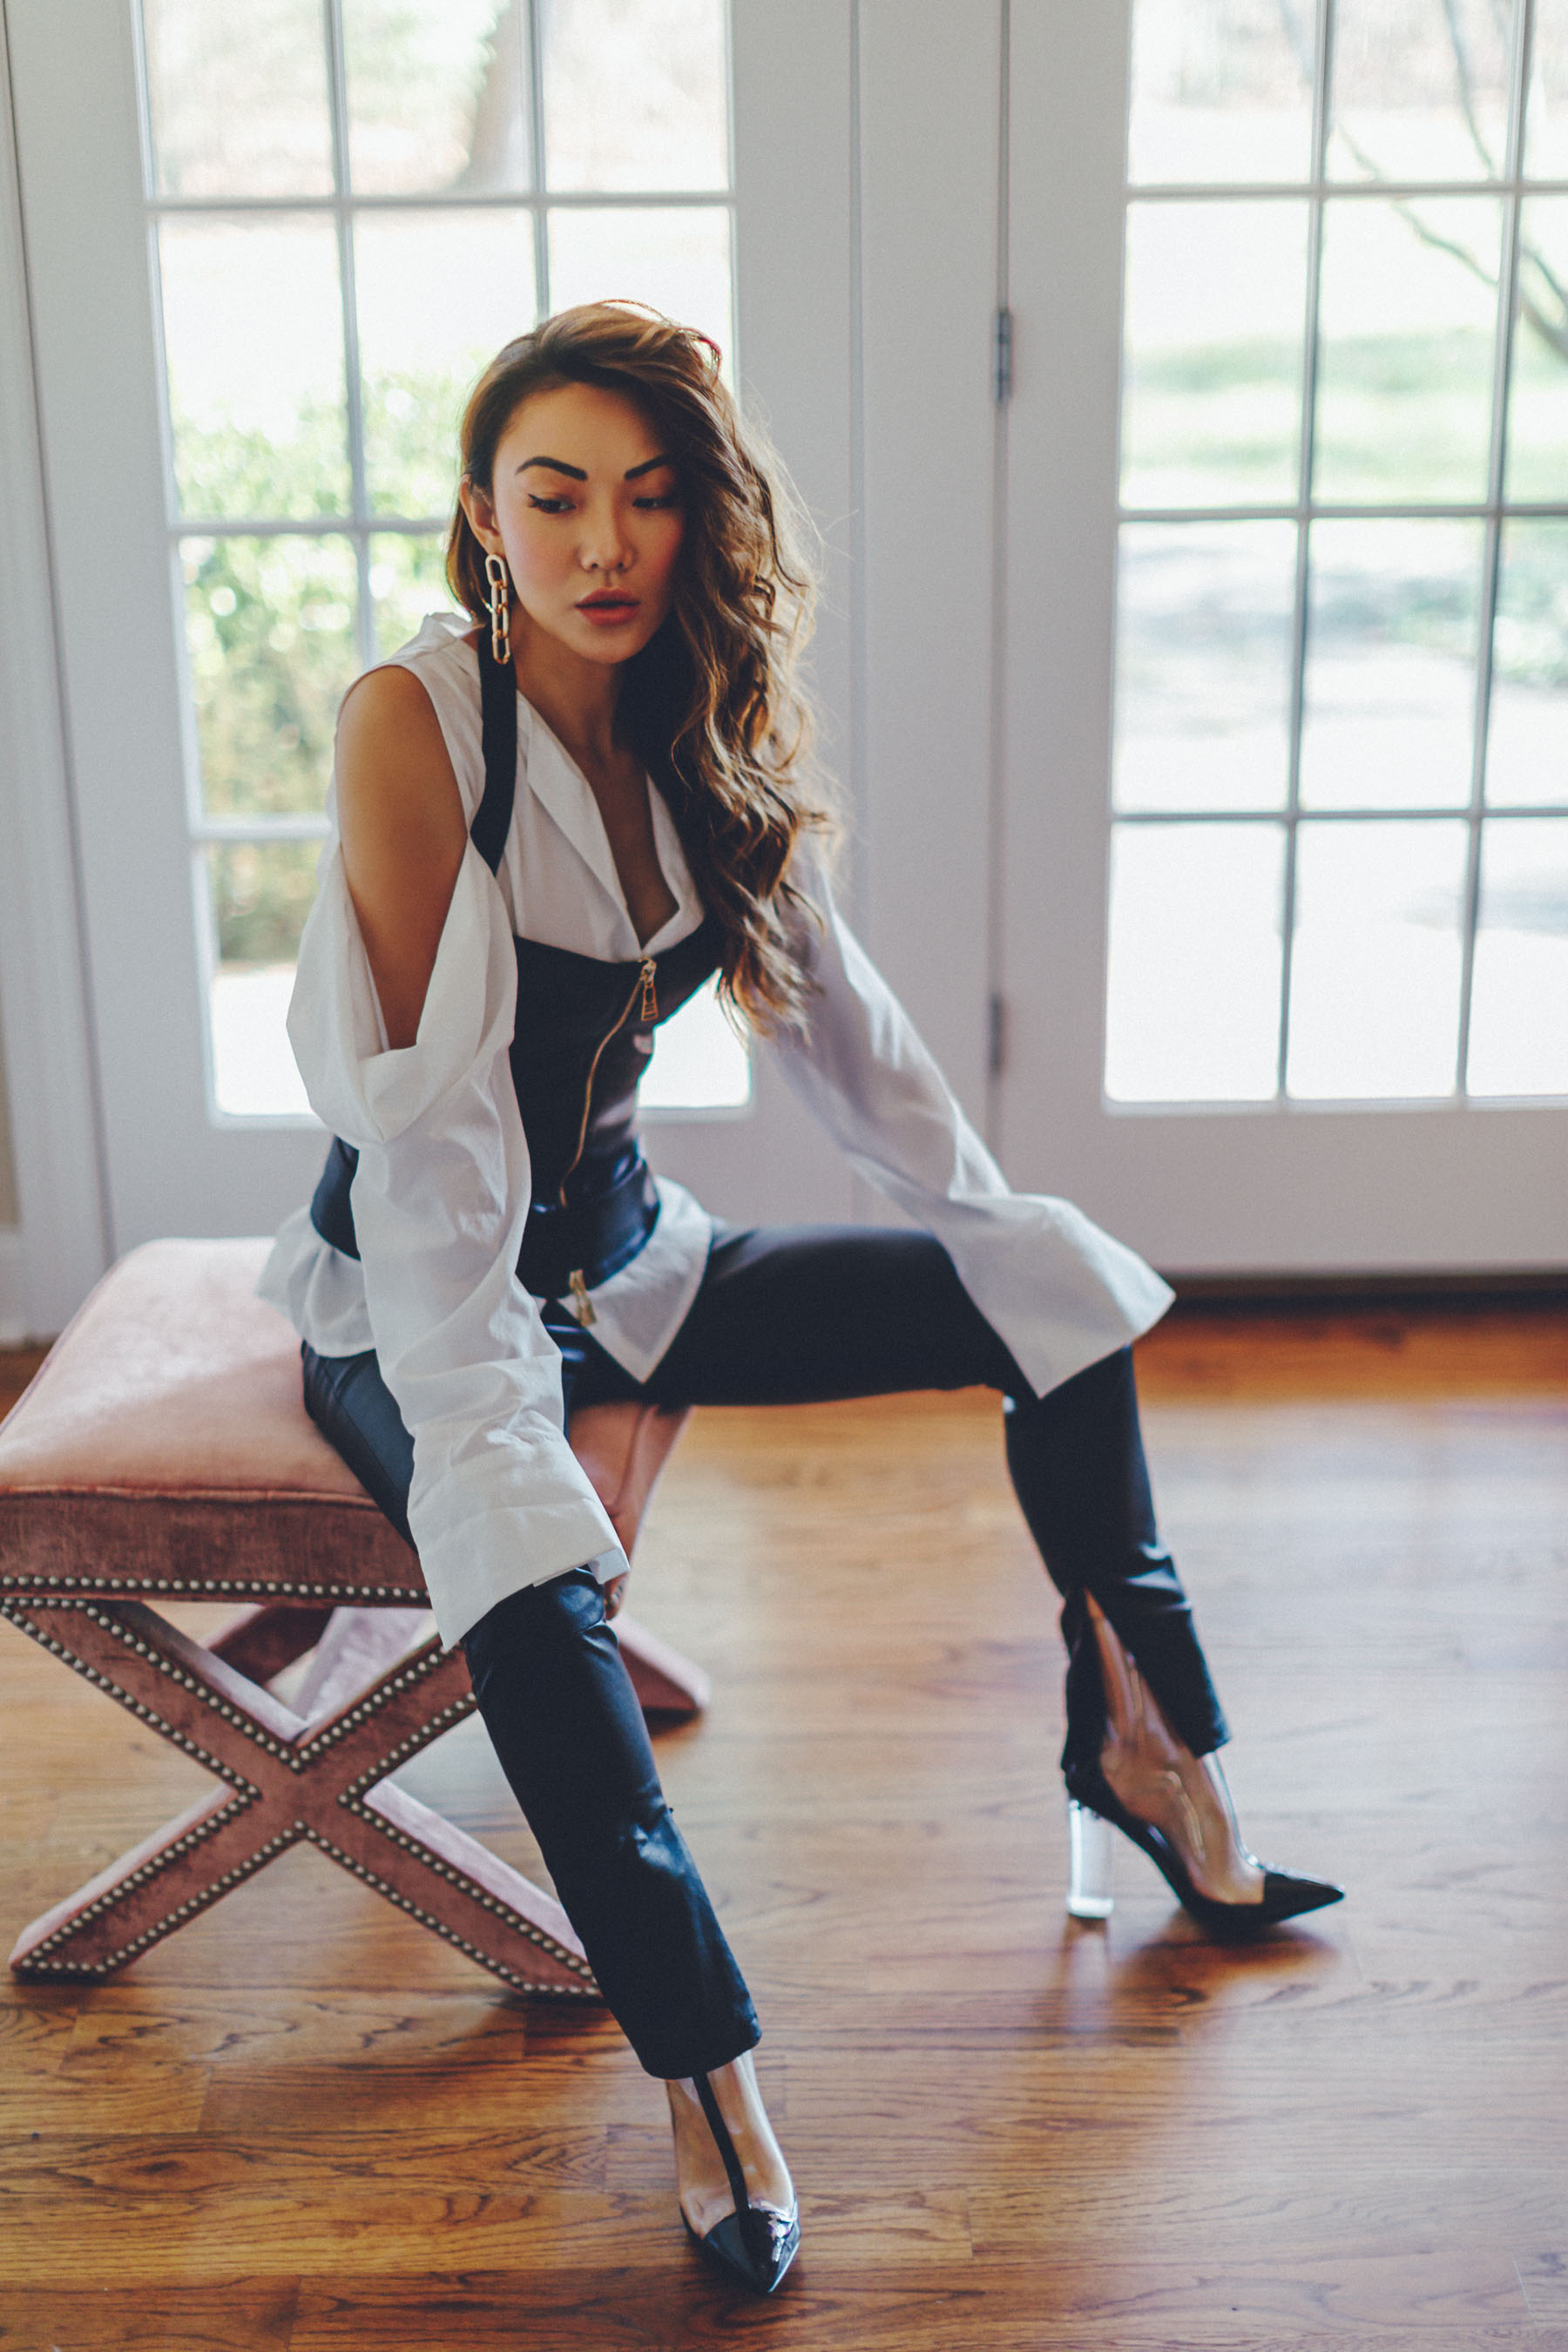 La Perla Leather Corset and Pants with Clear Boots // Notjessfashion.com